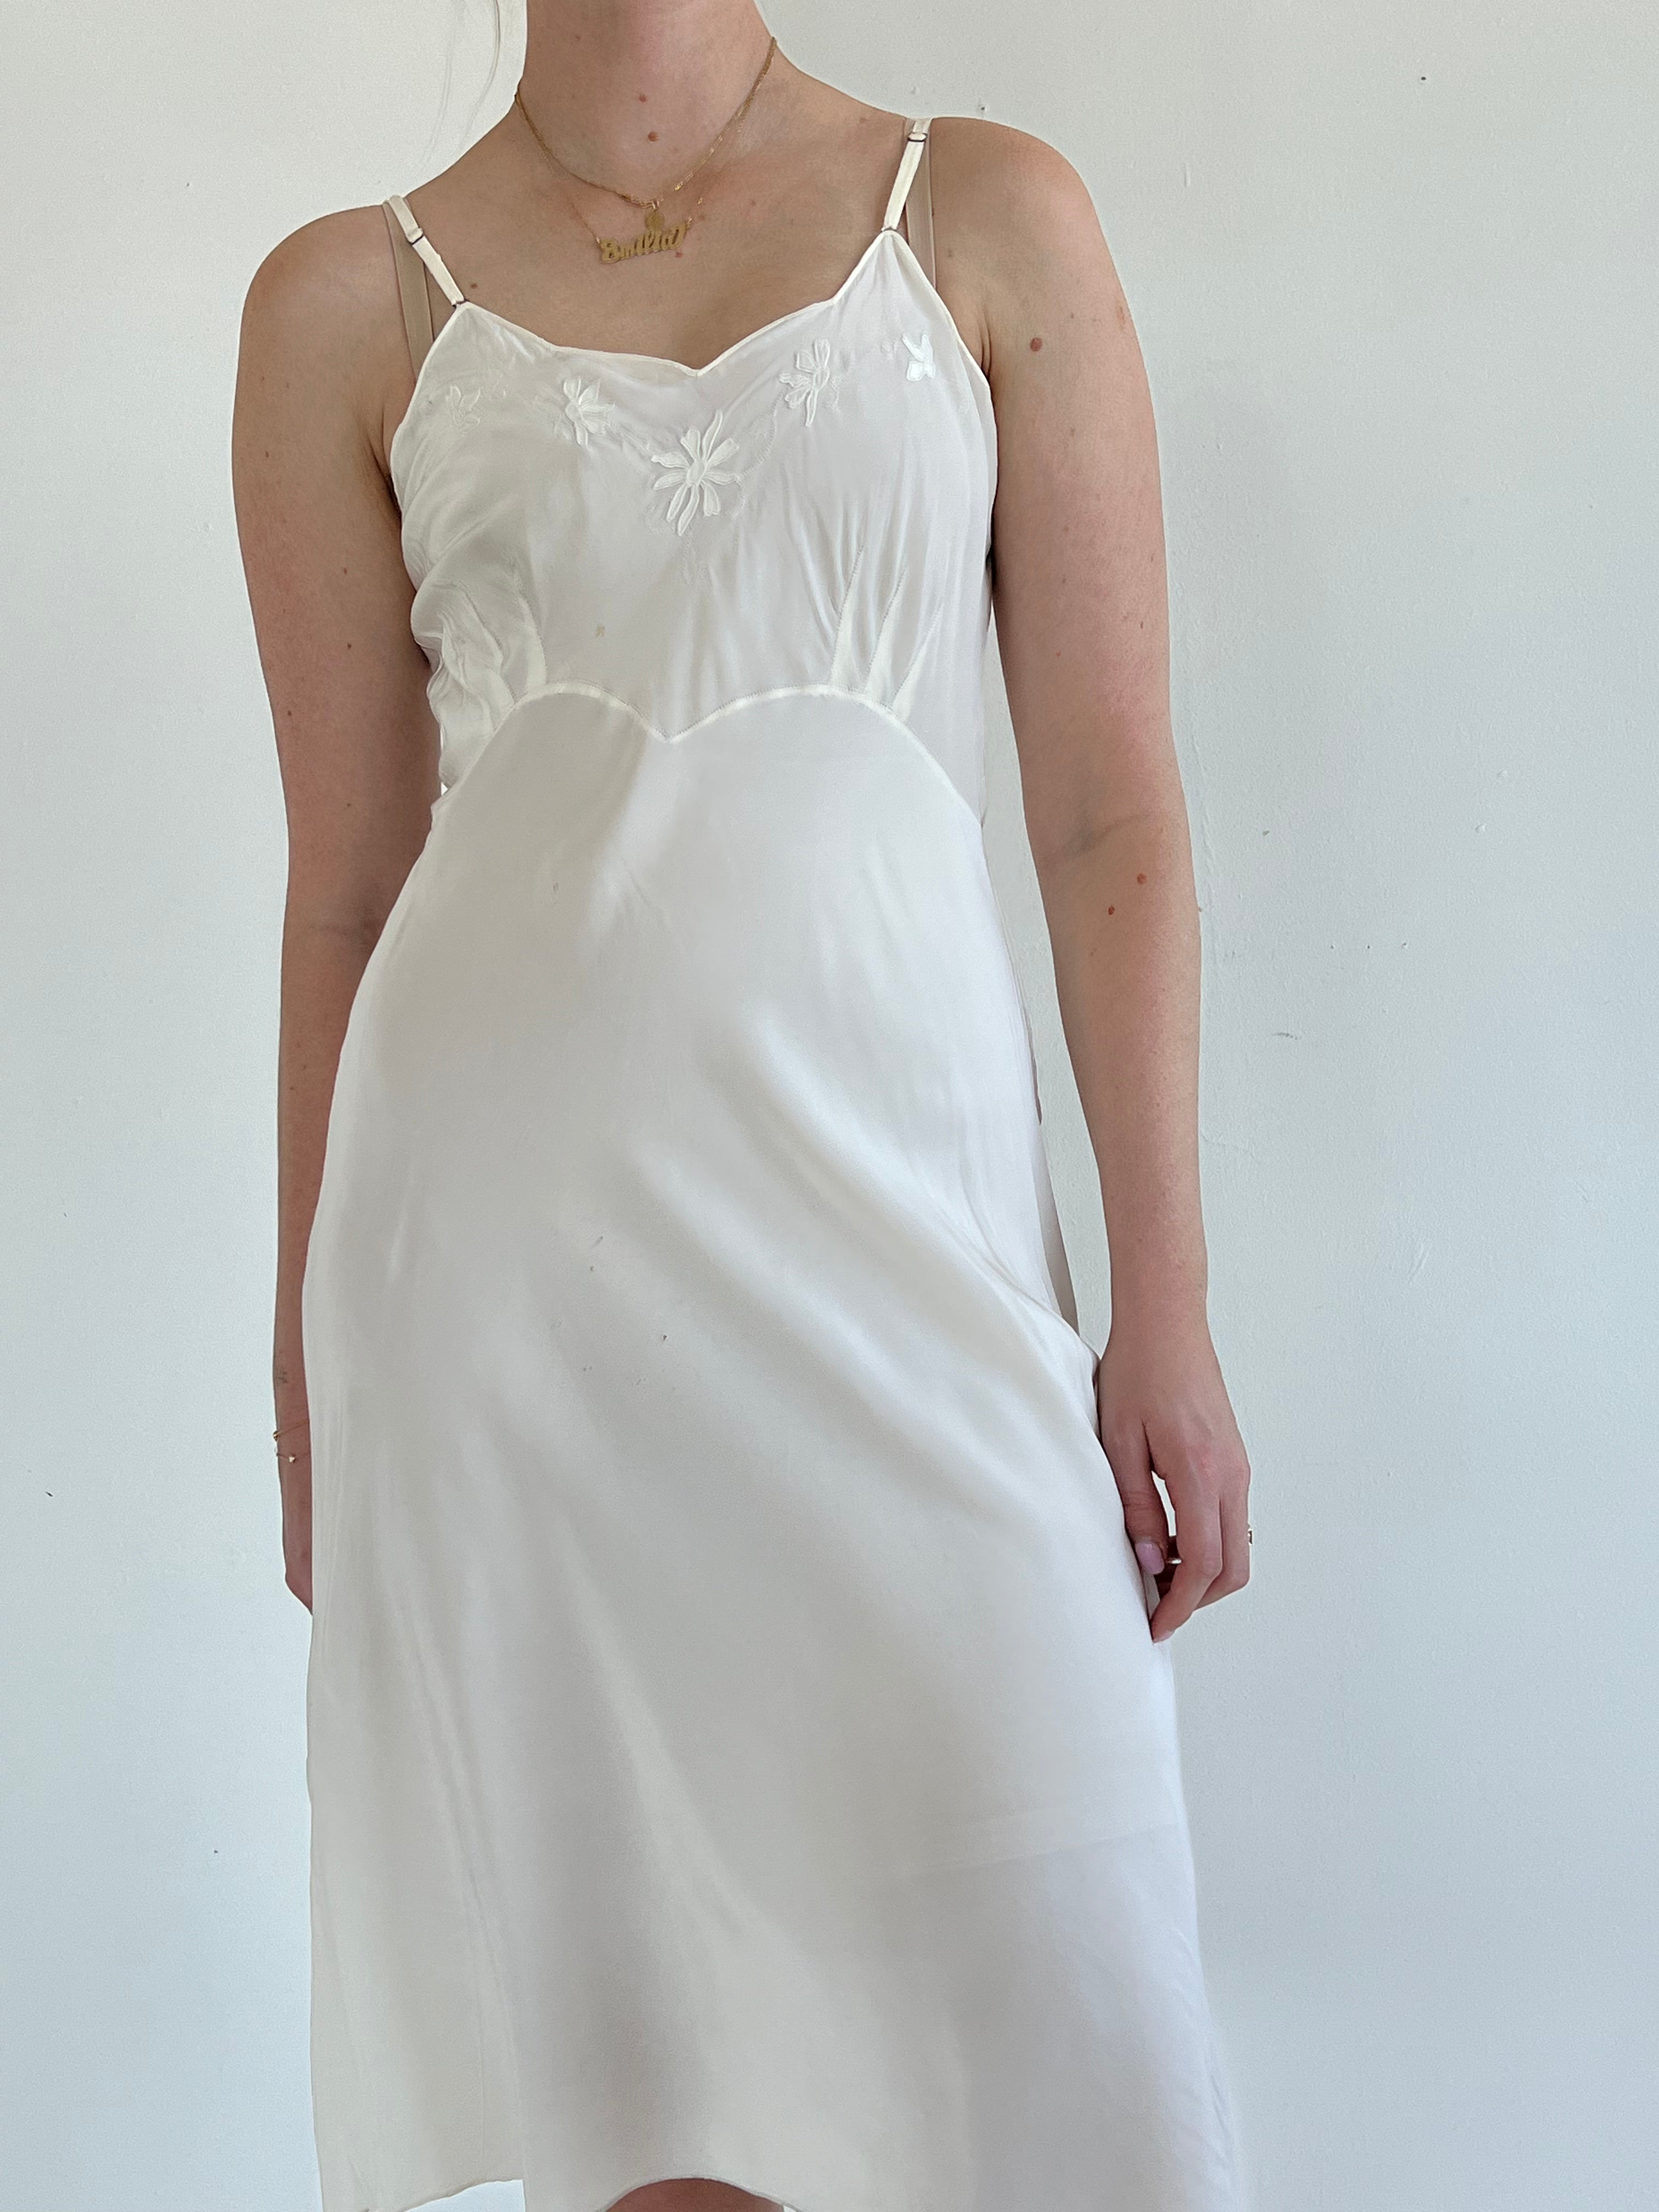 1930's White Spaghetti Strap Slip with Floral Embroidery